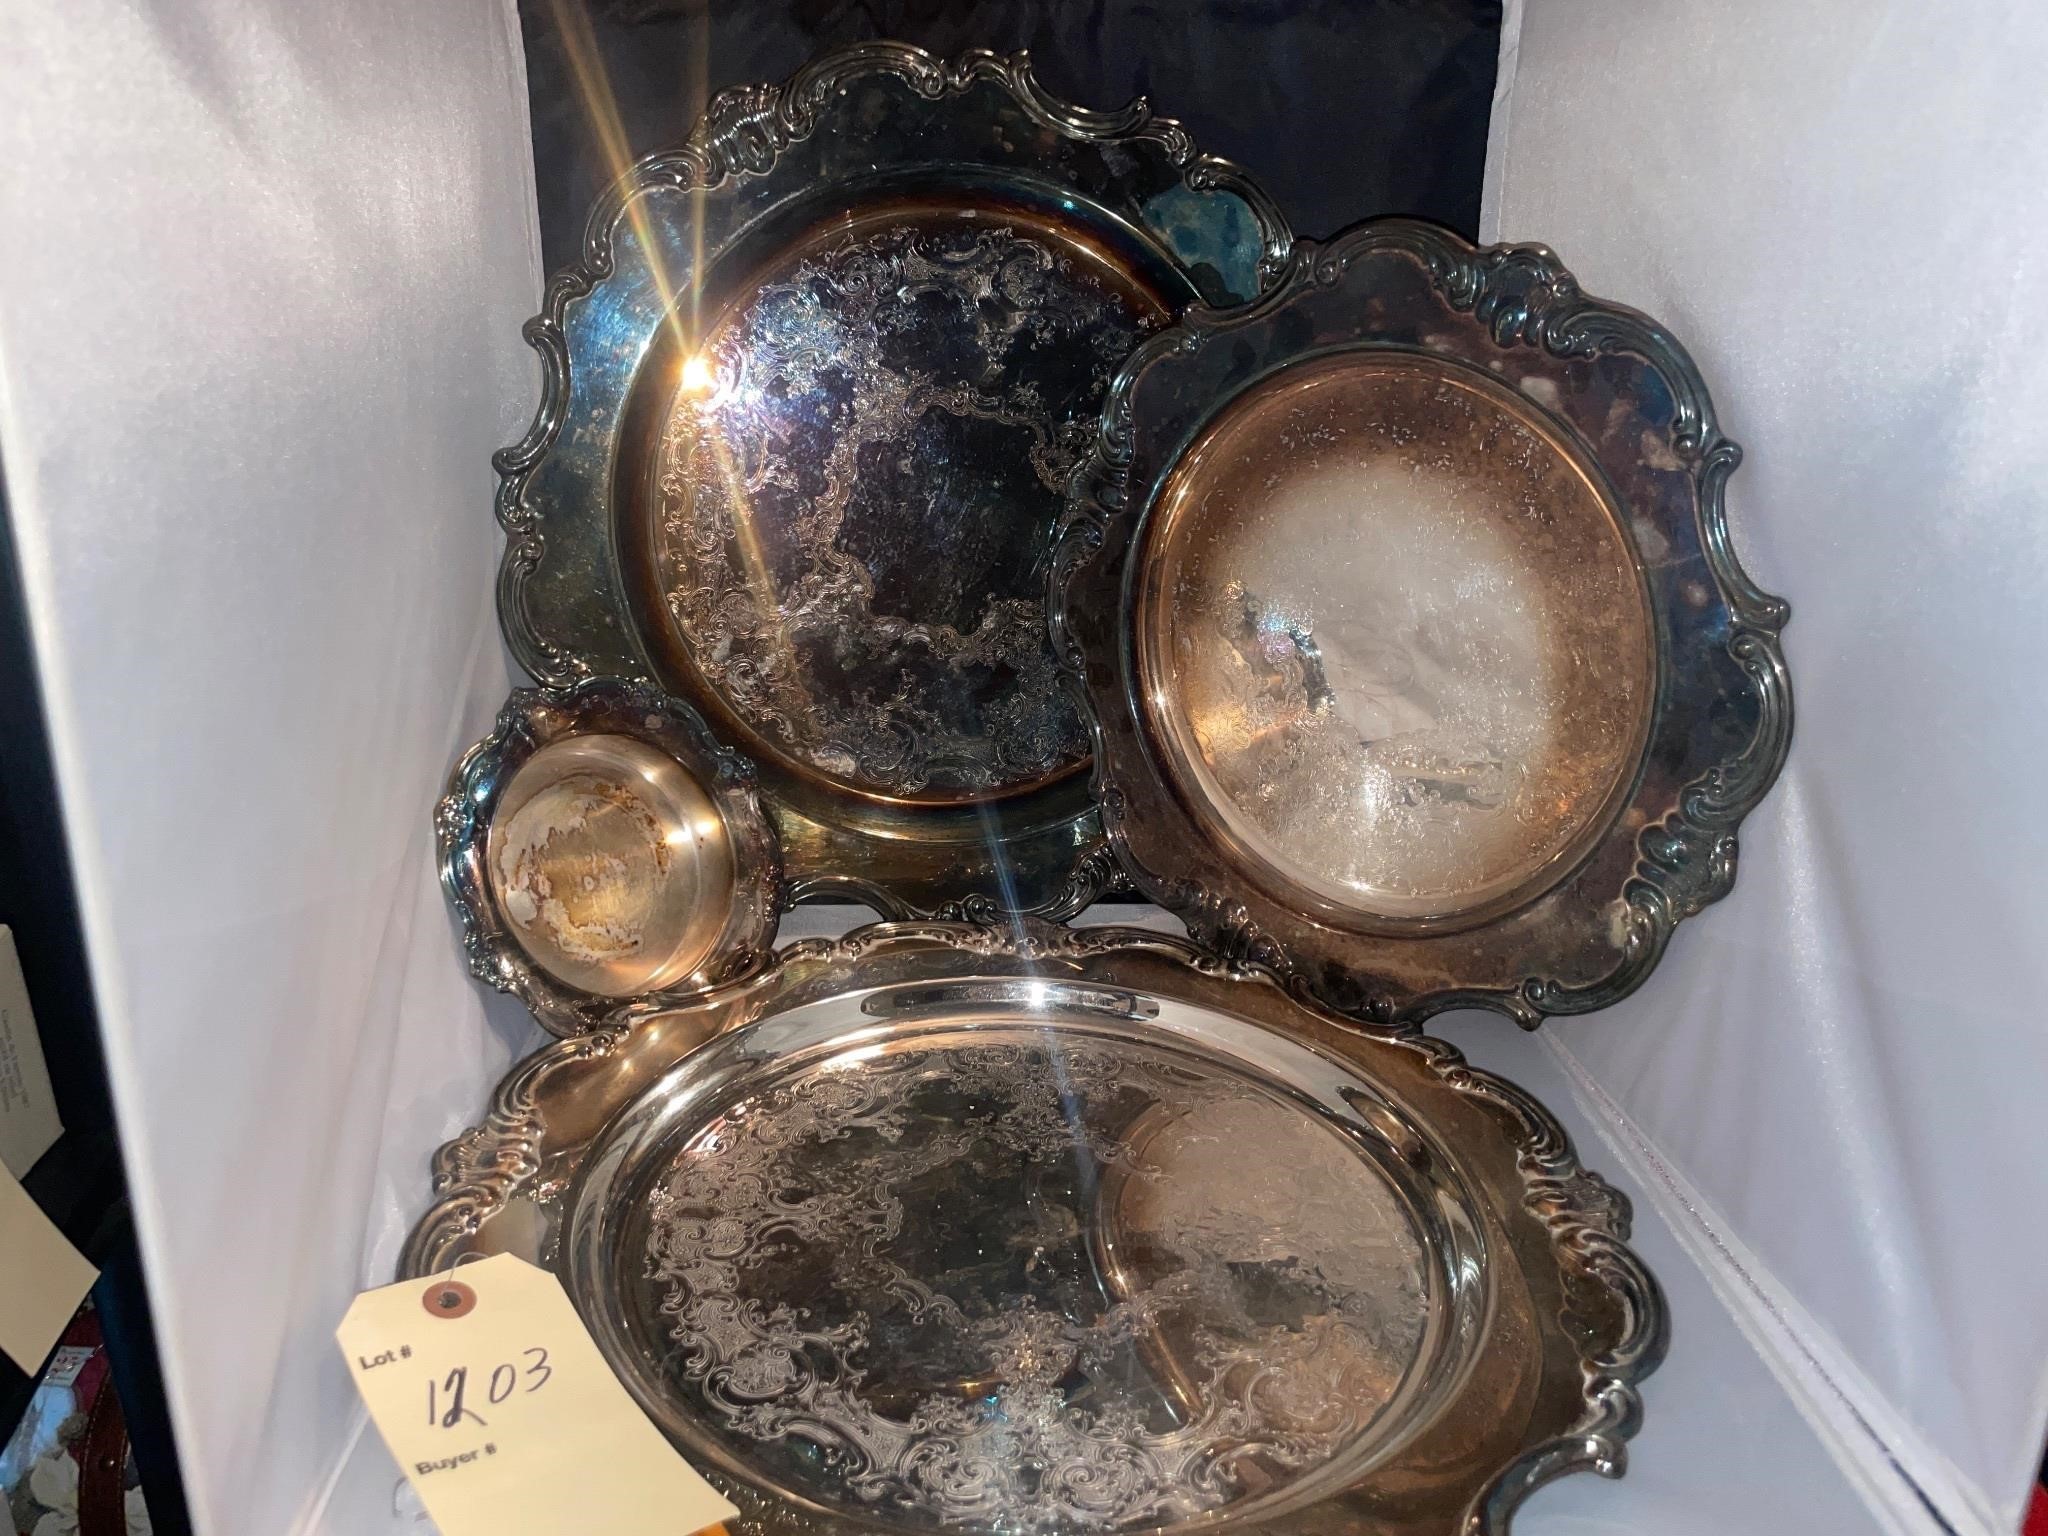 HUGE DOWNSIZING CONSIGNMENT SPRING AUCTION PART I